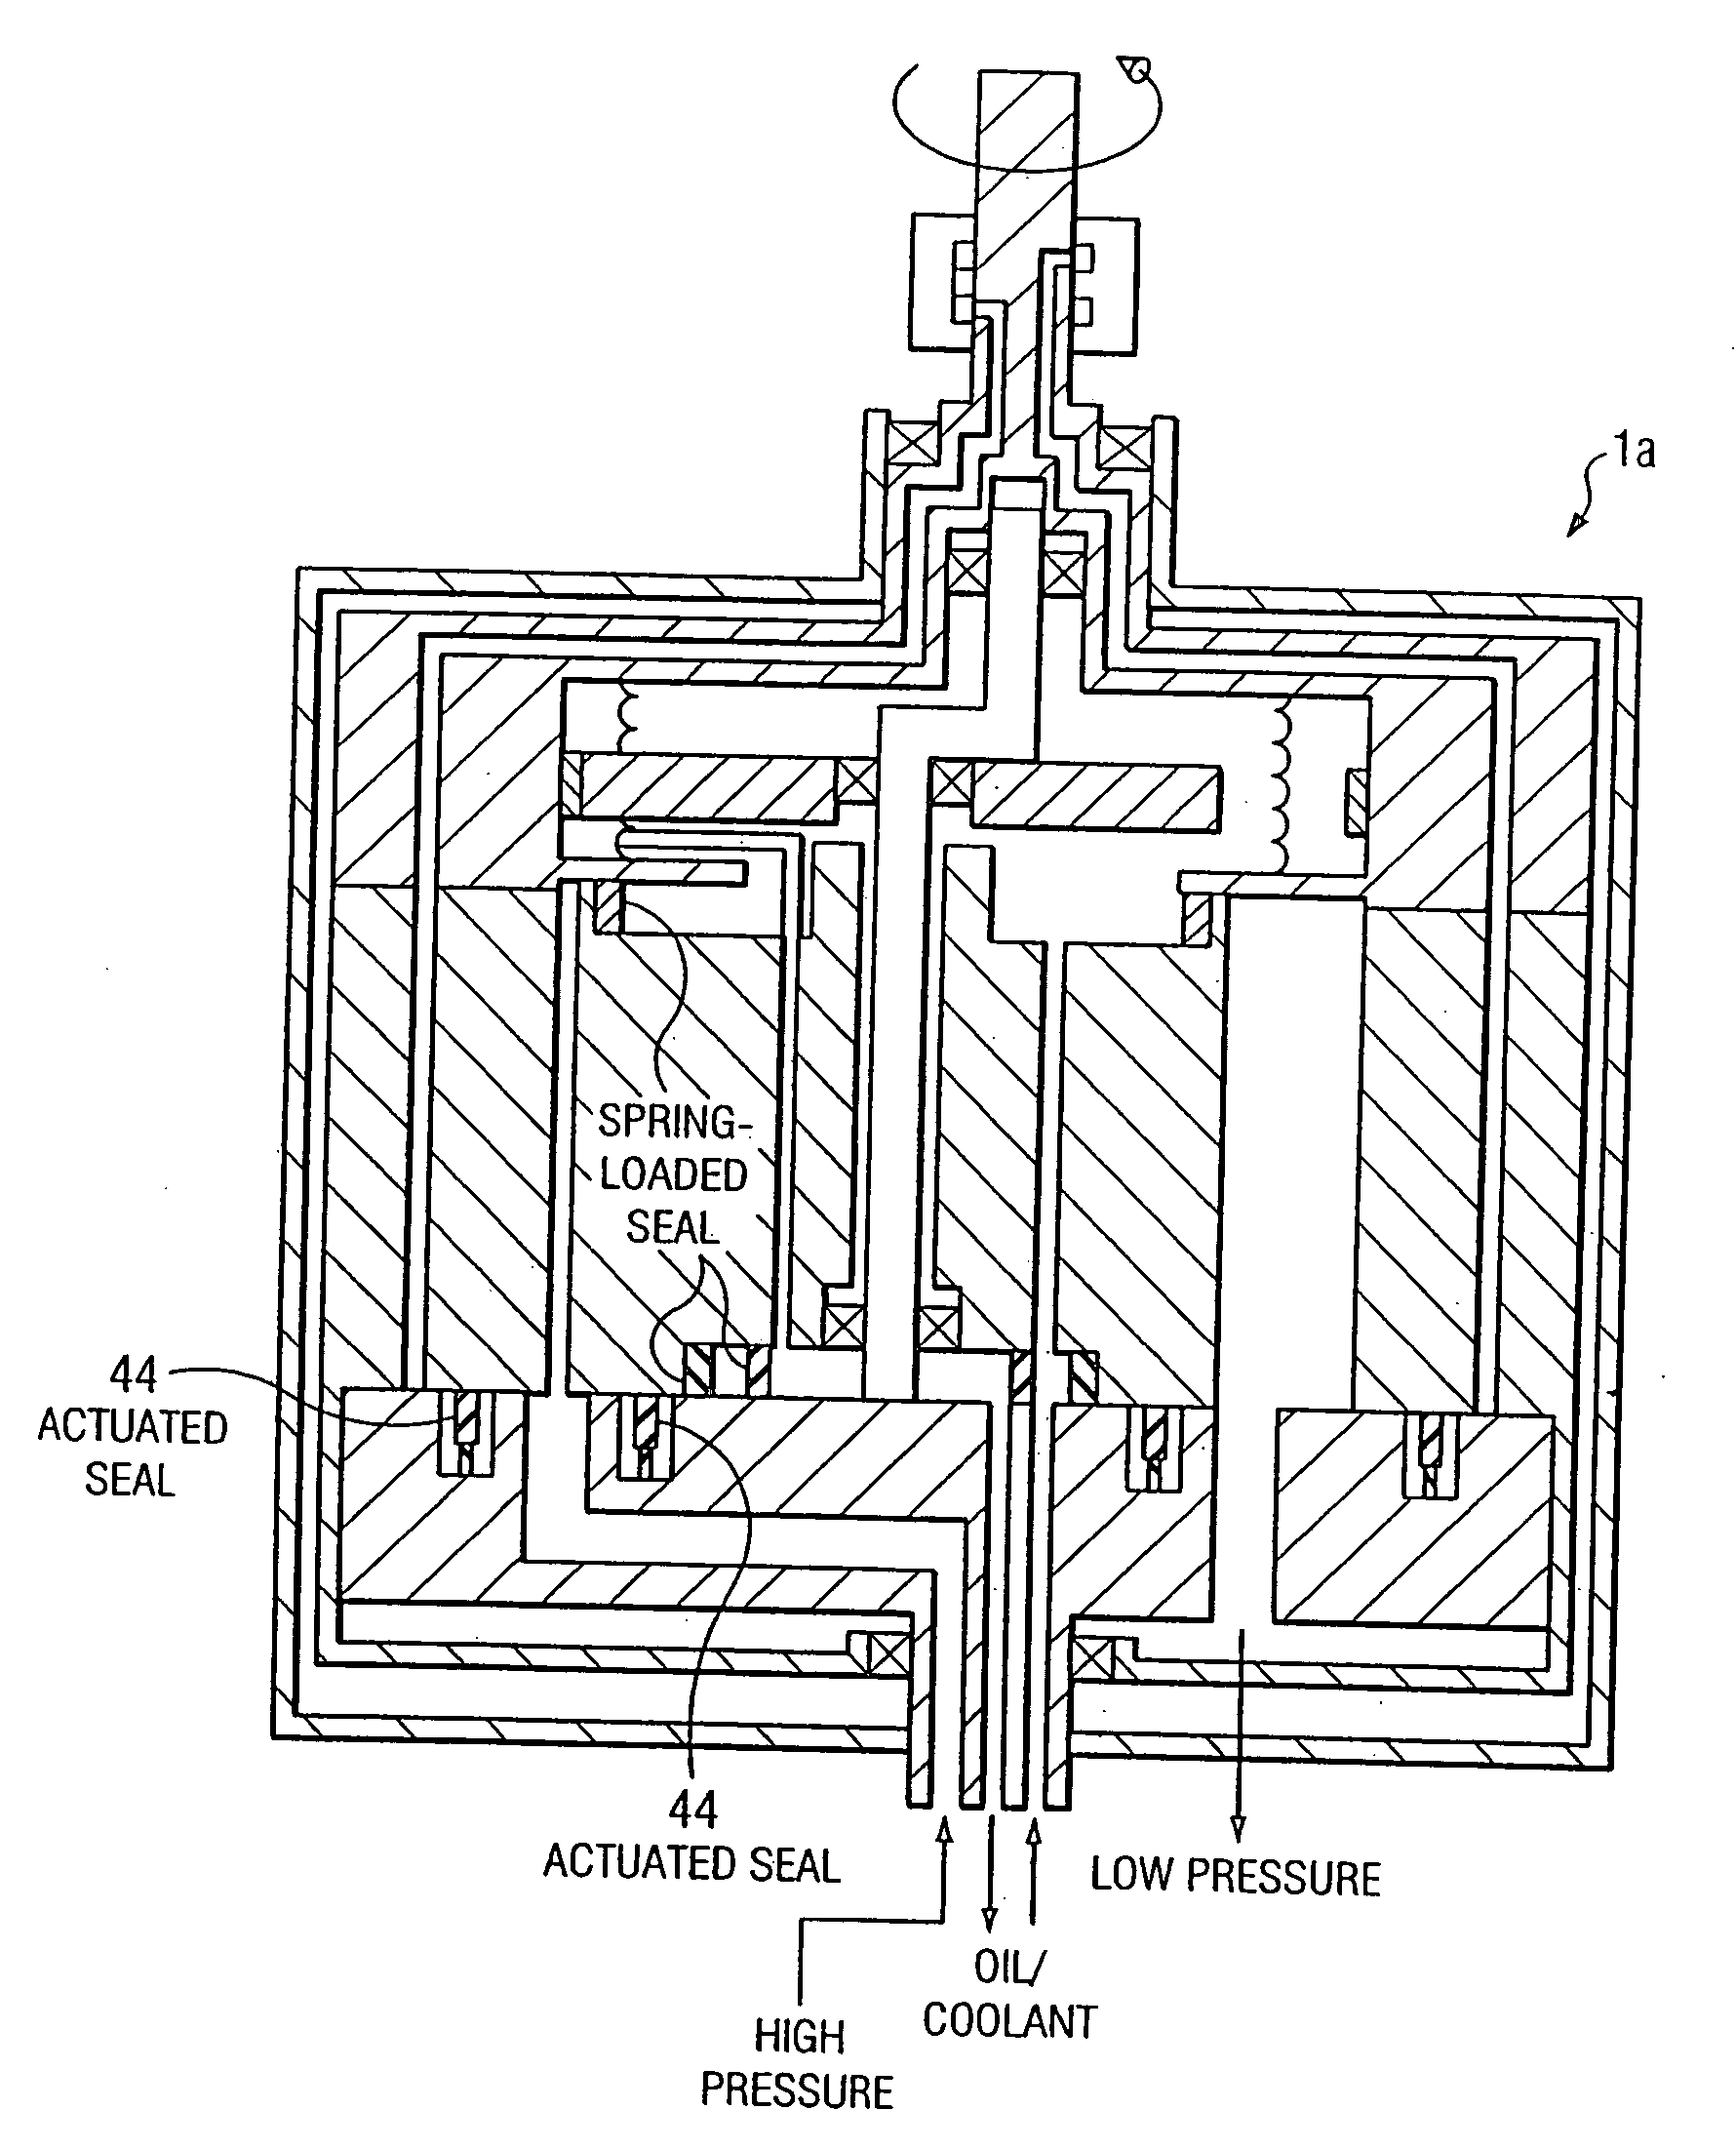 Gerotor apparatus for a quasi-isothermal Brayton cycle engine